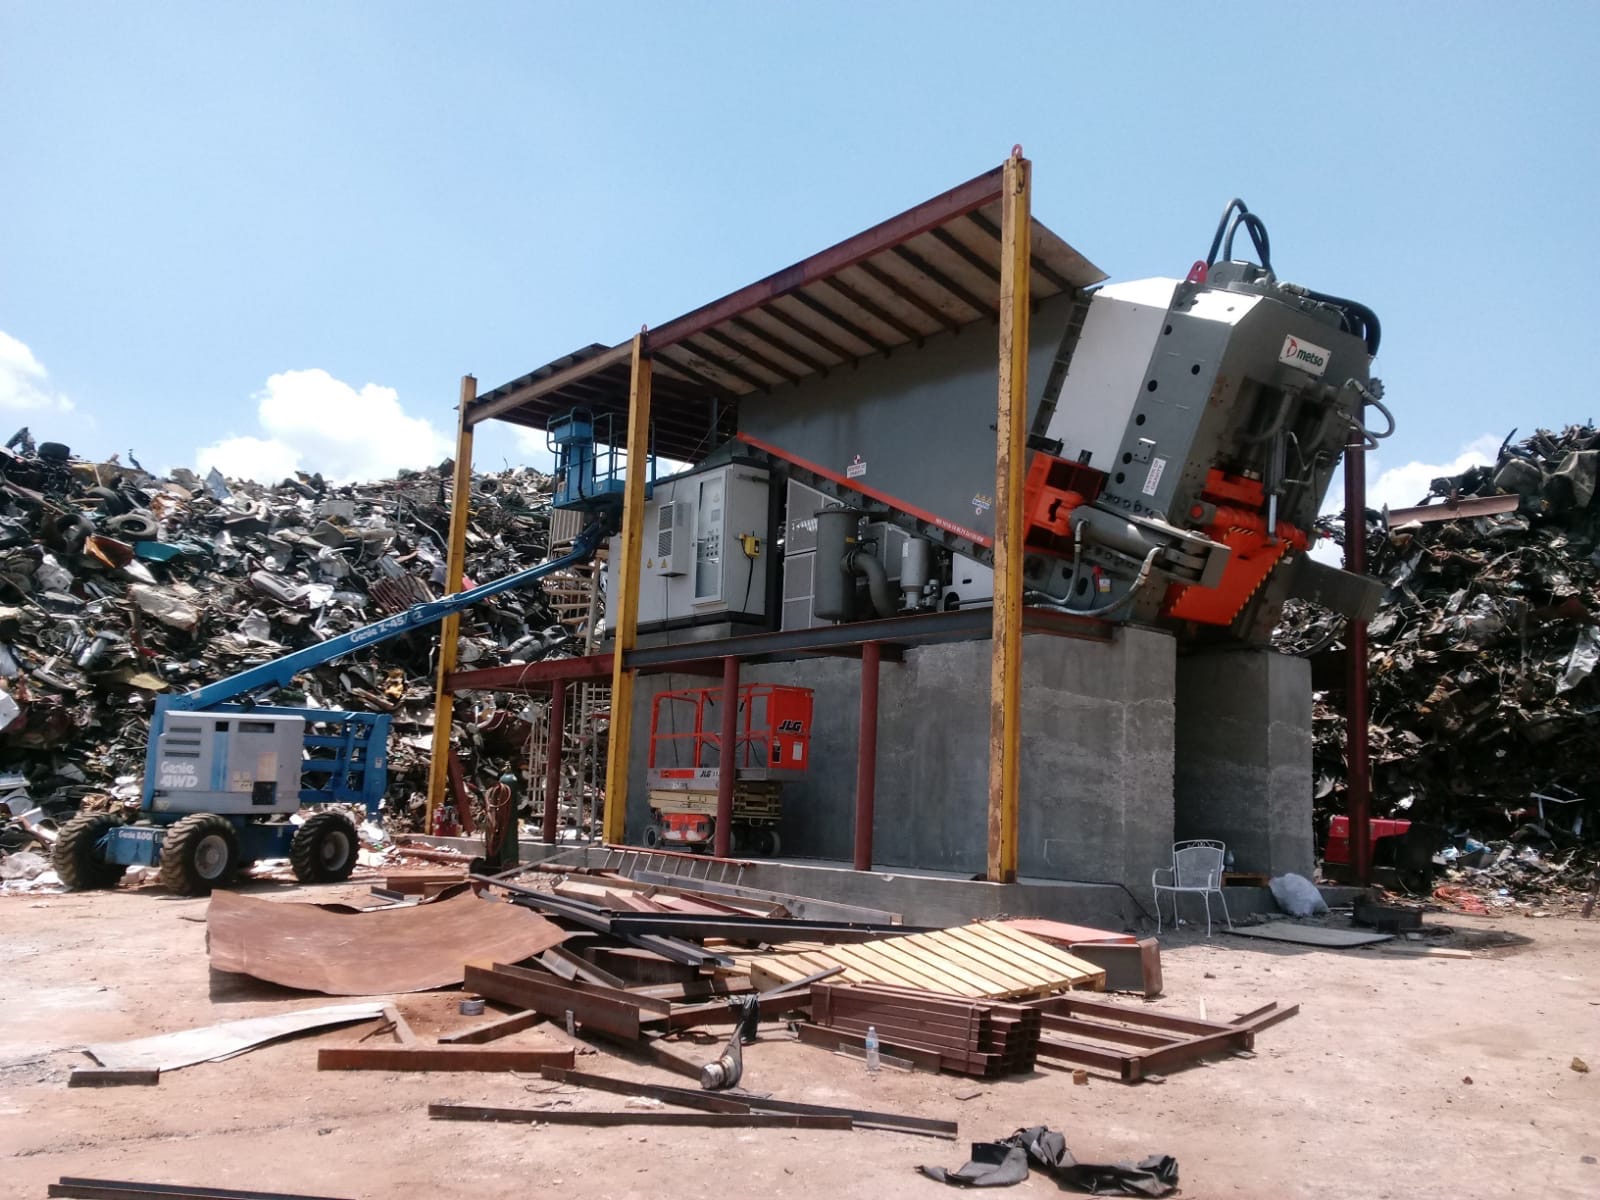 Metal Recycling in Fort Wort, TX